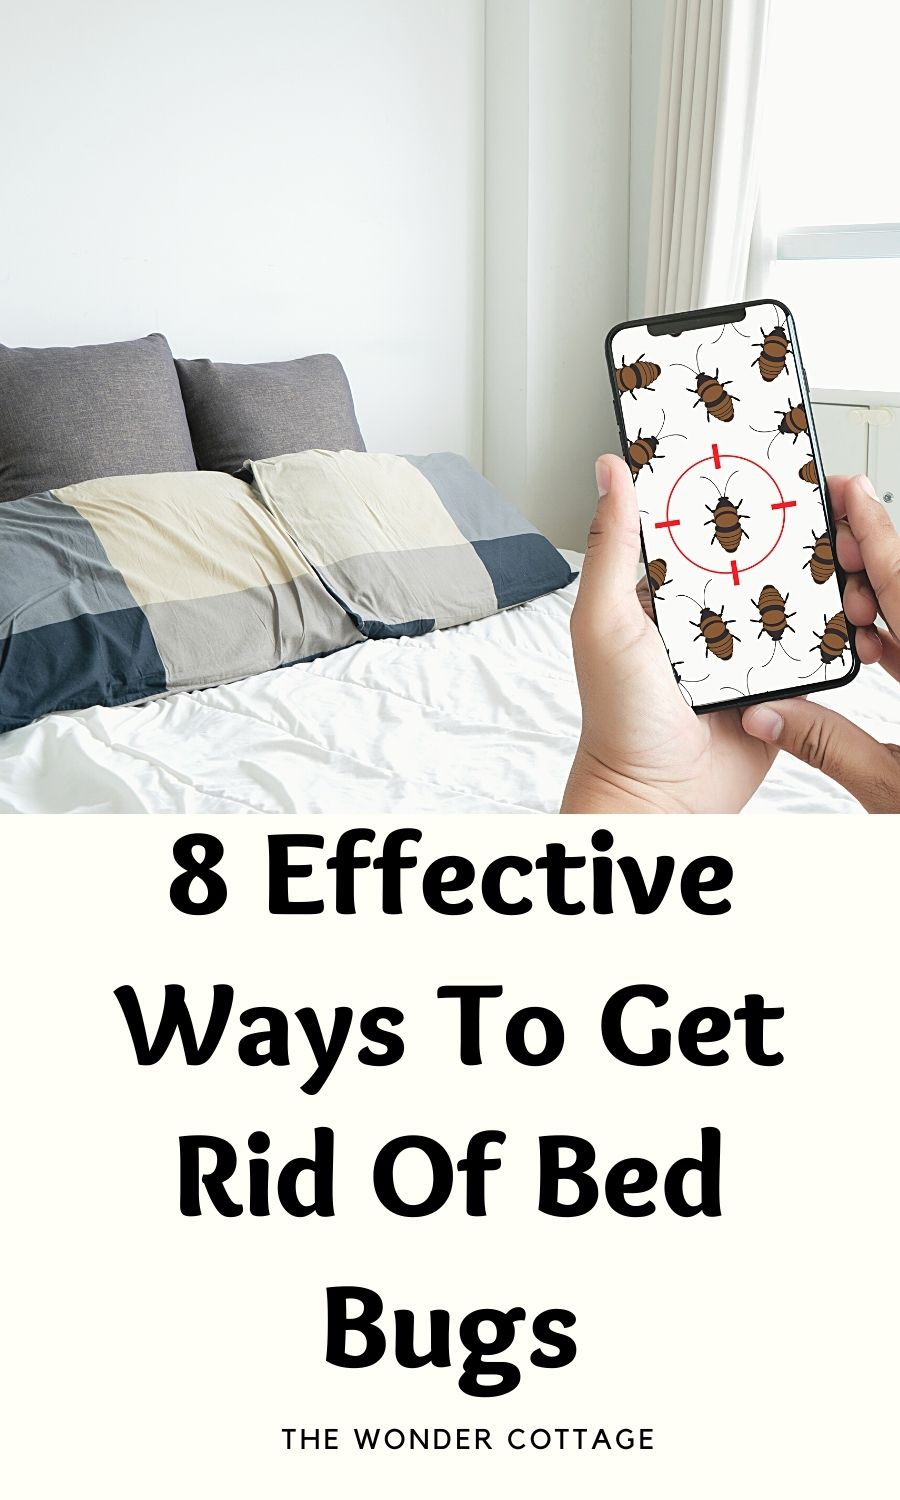 8 effective ways to get rid of bed bugs